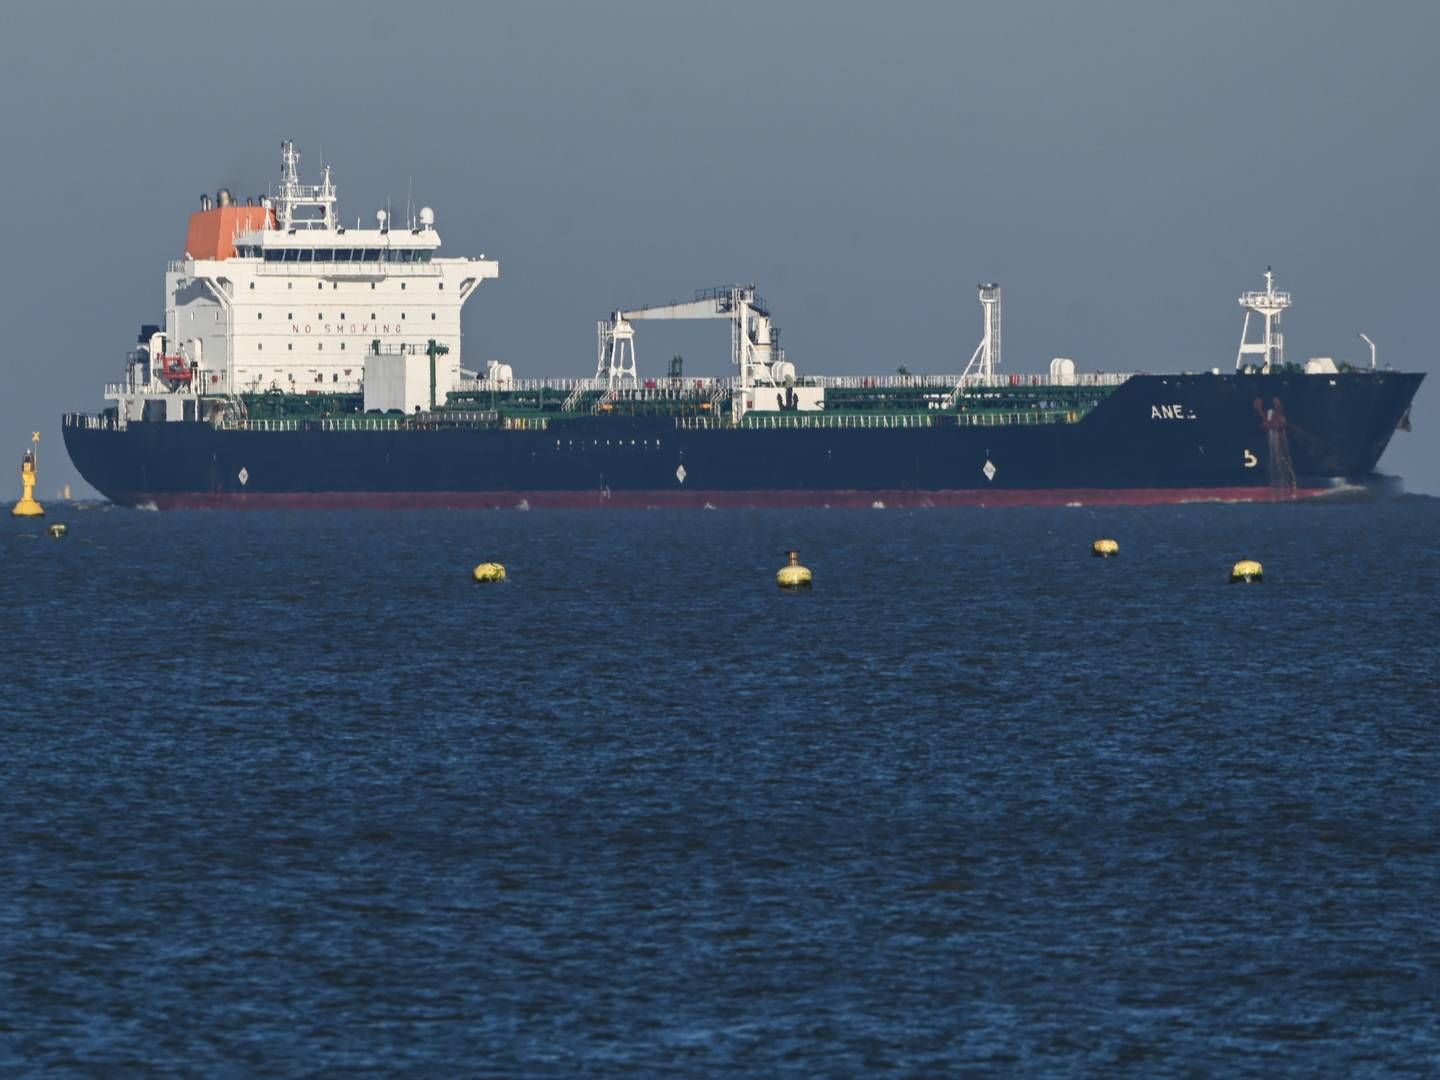 File photo. In June last year, the Norwegian media Dagens Næringsliv described how Fractal Marine was shipping oil worth billions of kroner from Russia's oil terminals and in a short time has become the second largest player in the so-called shadow fleet. | Photo: Lars Klemmer/AP/Ritzau Scanpix